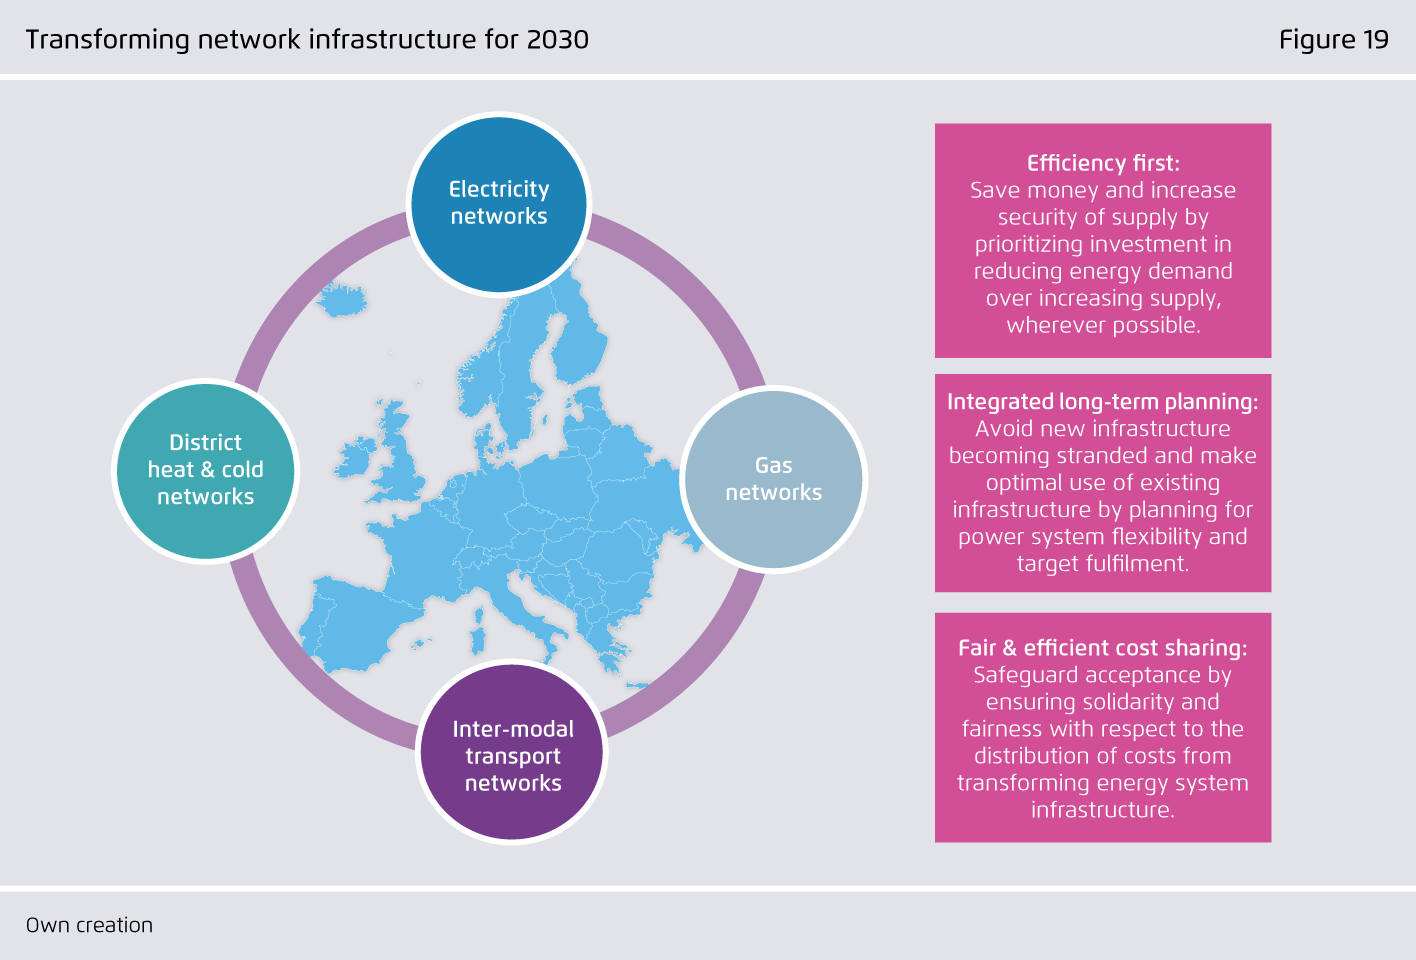 Preview for Transforming network infrastructure for 2030